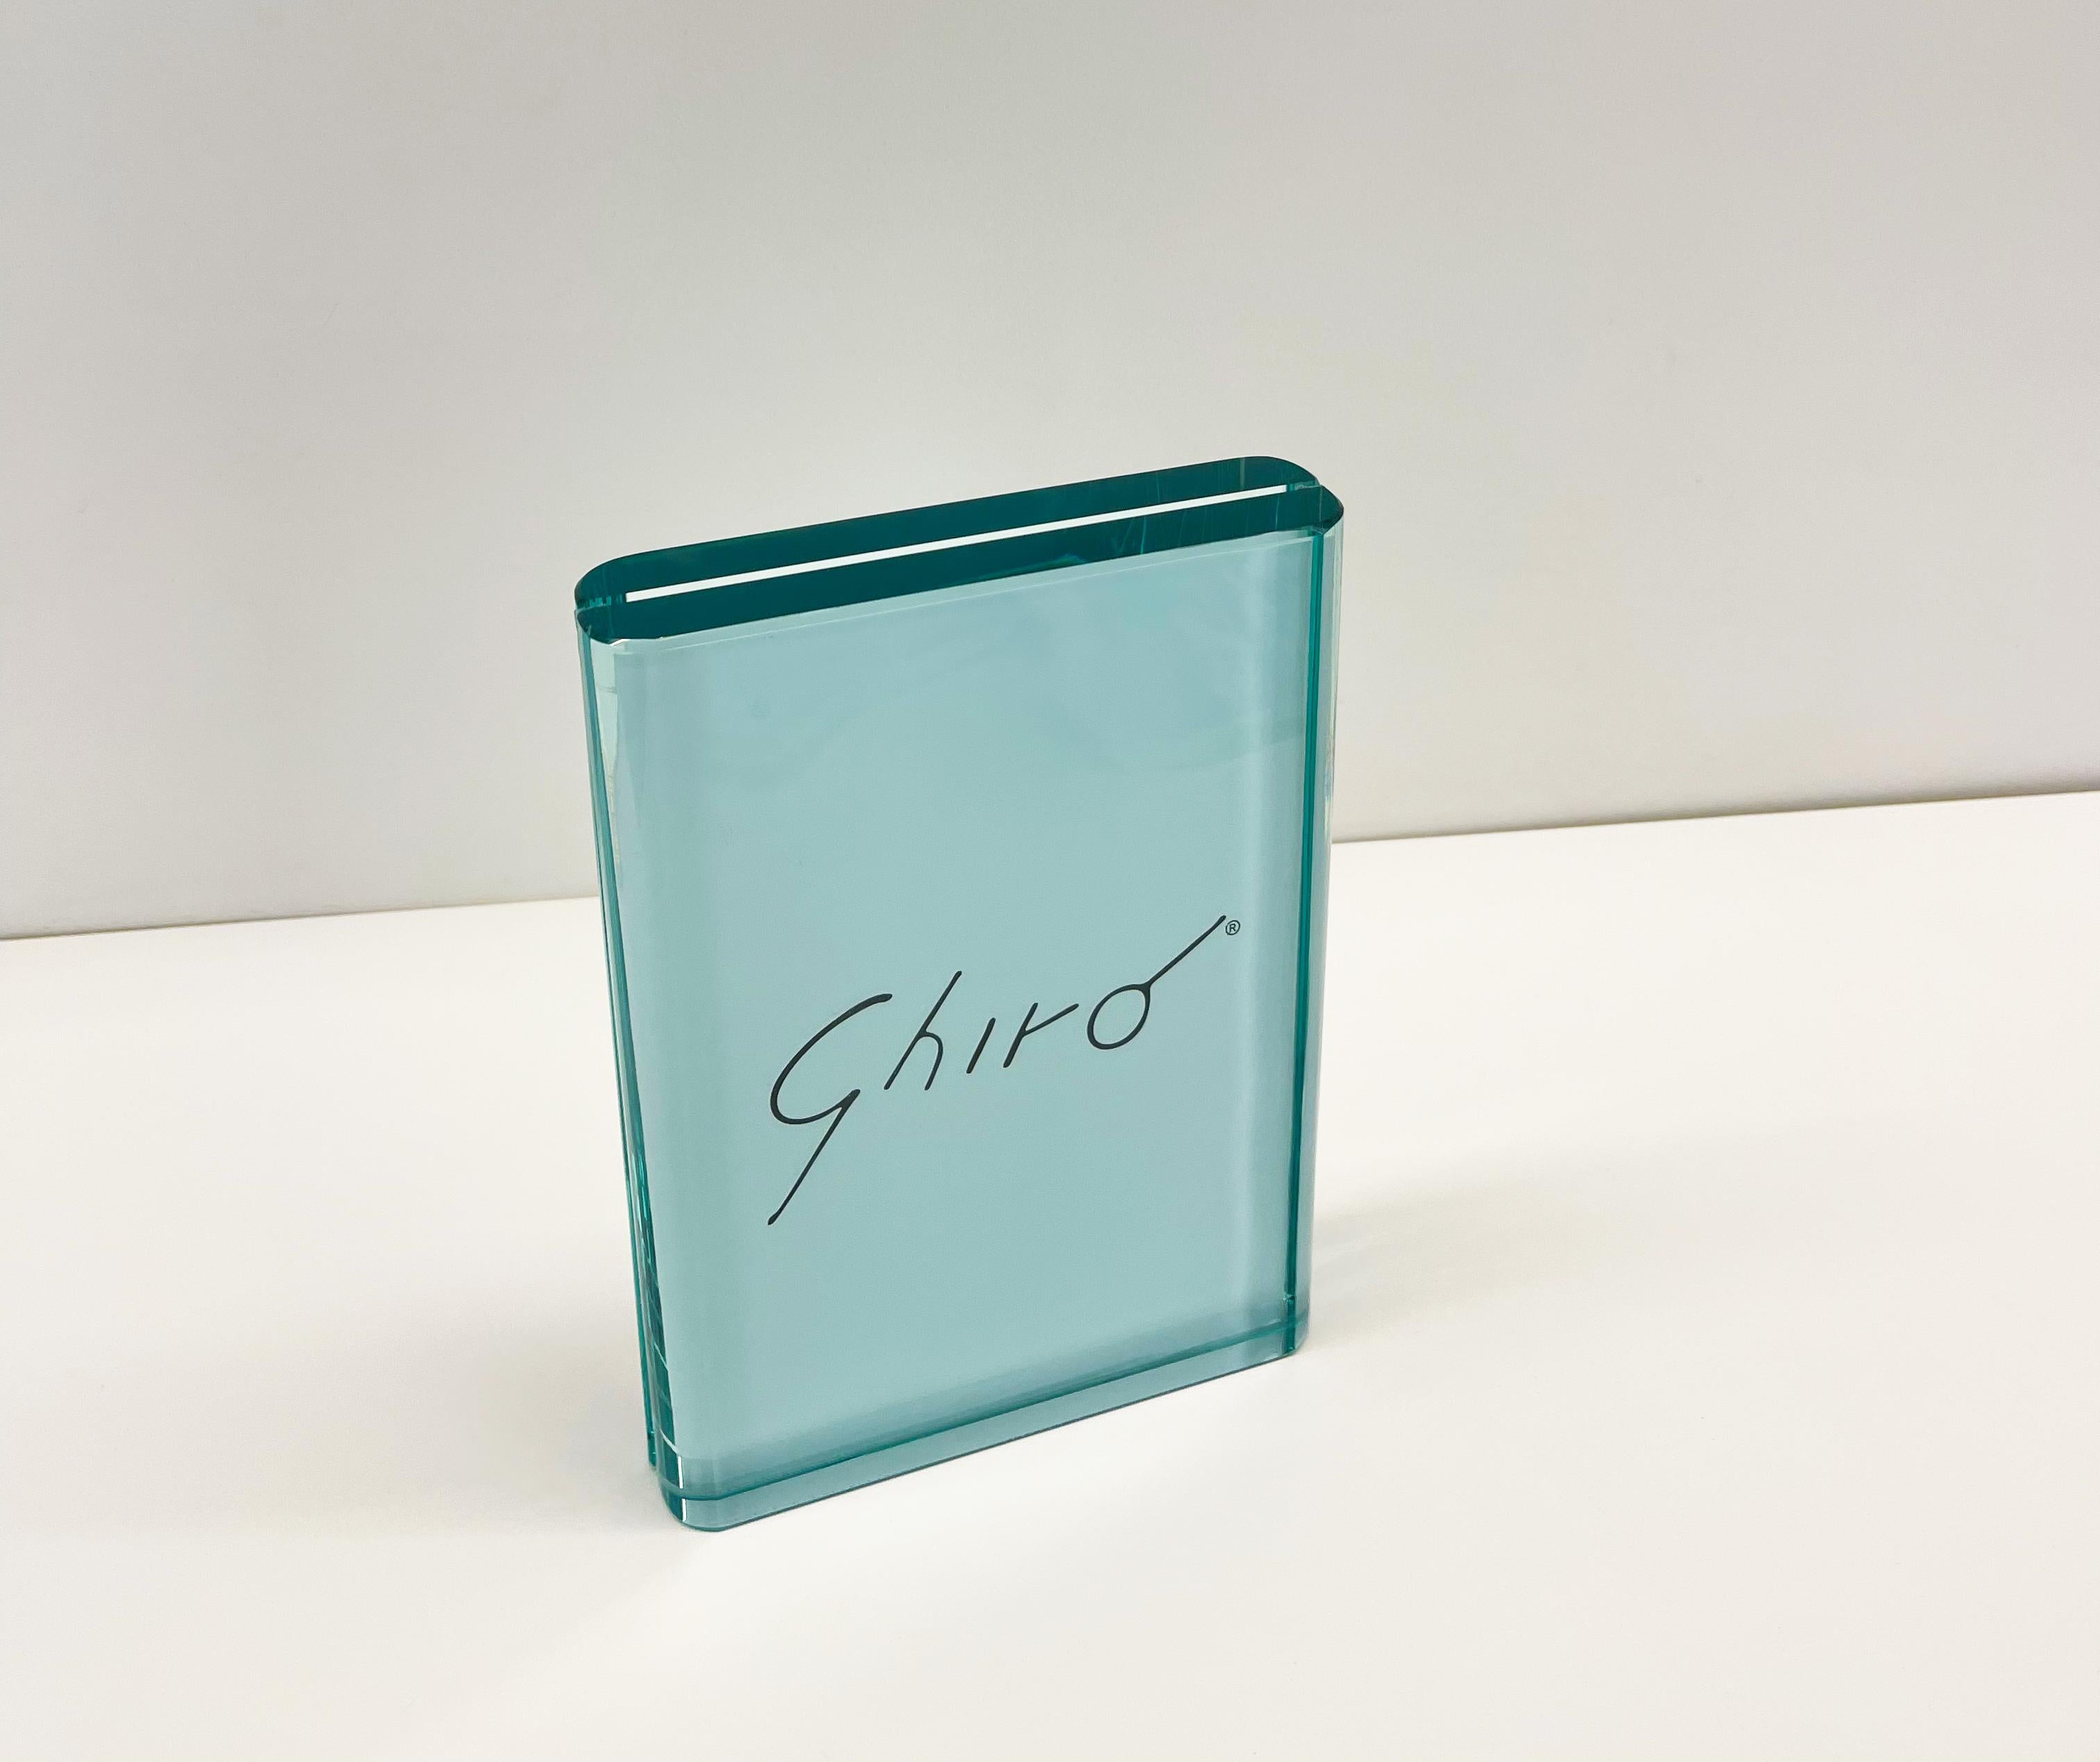 Contemporary Handmade Aquamarine Vertical Crystal Picture Frame by Ghirò Studio For Sale 1